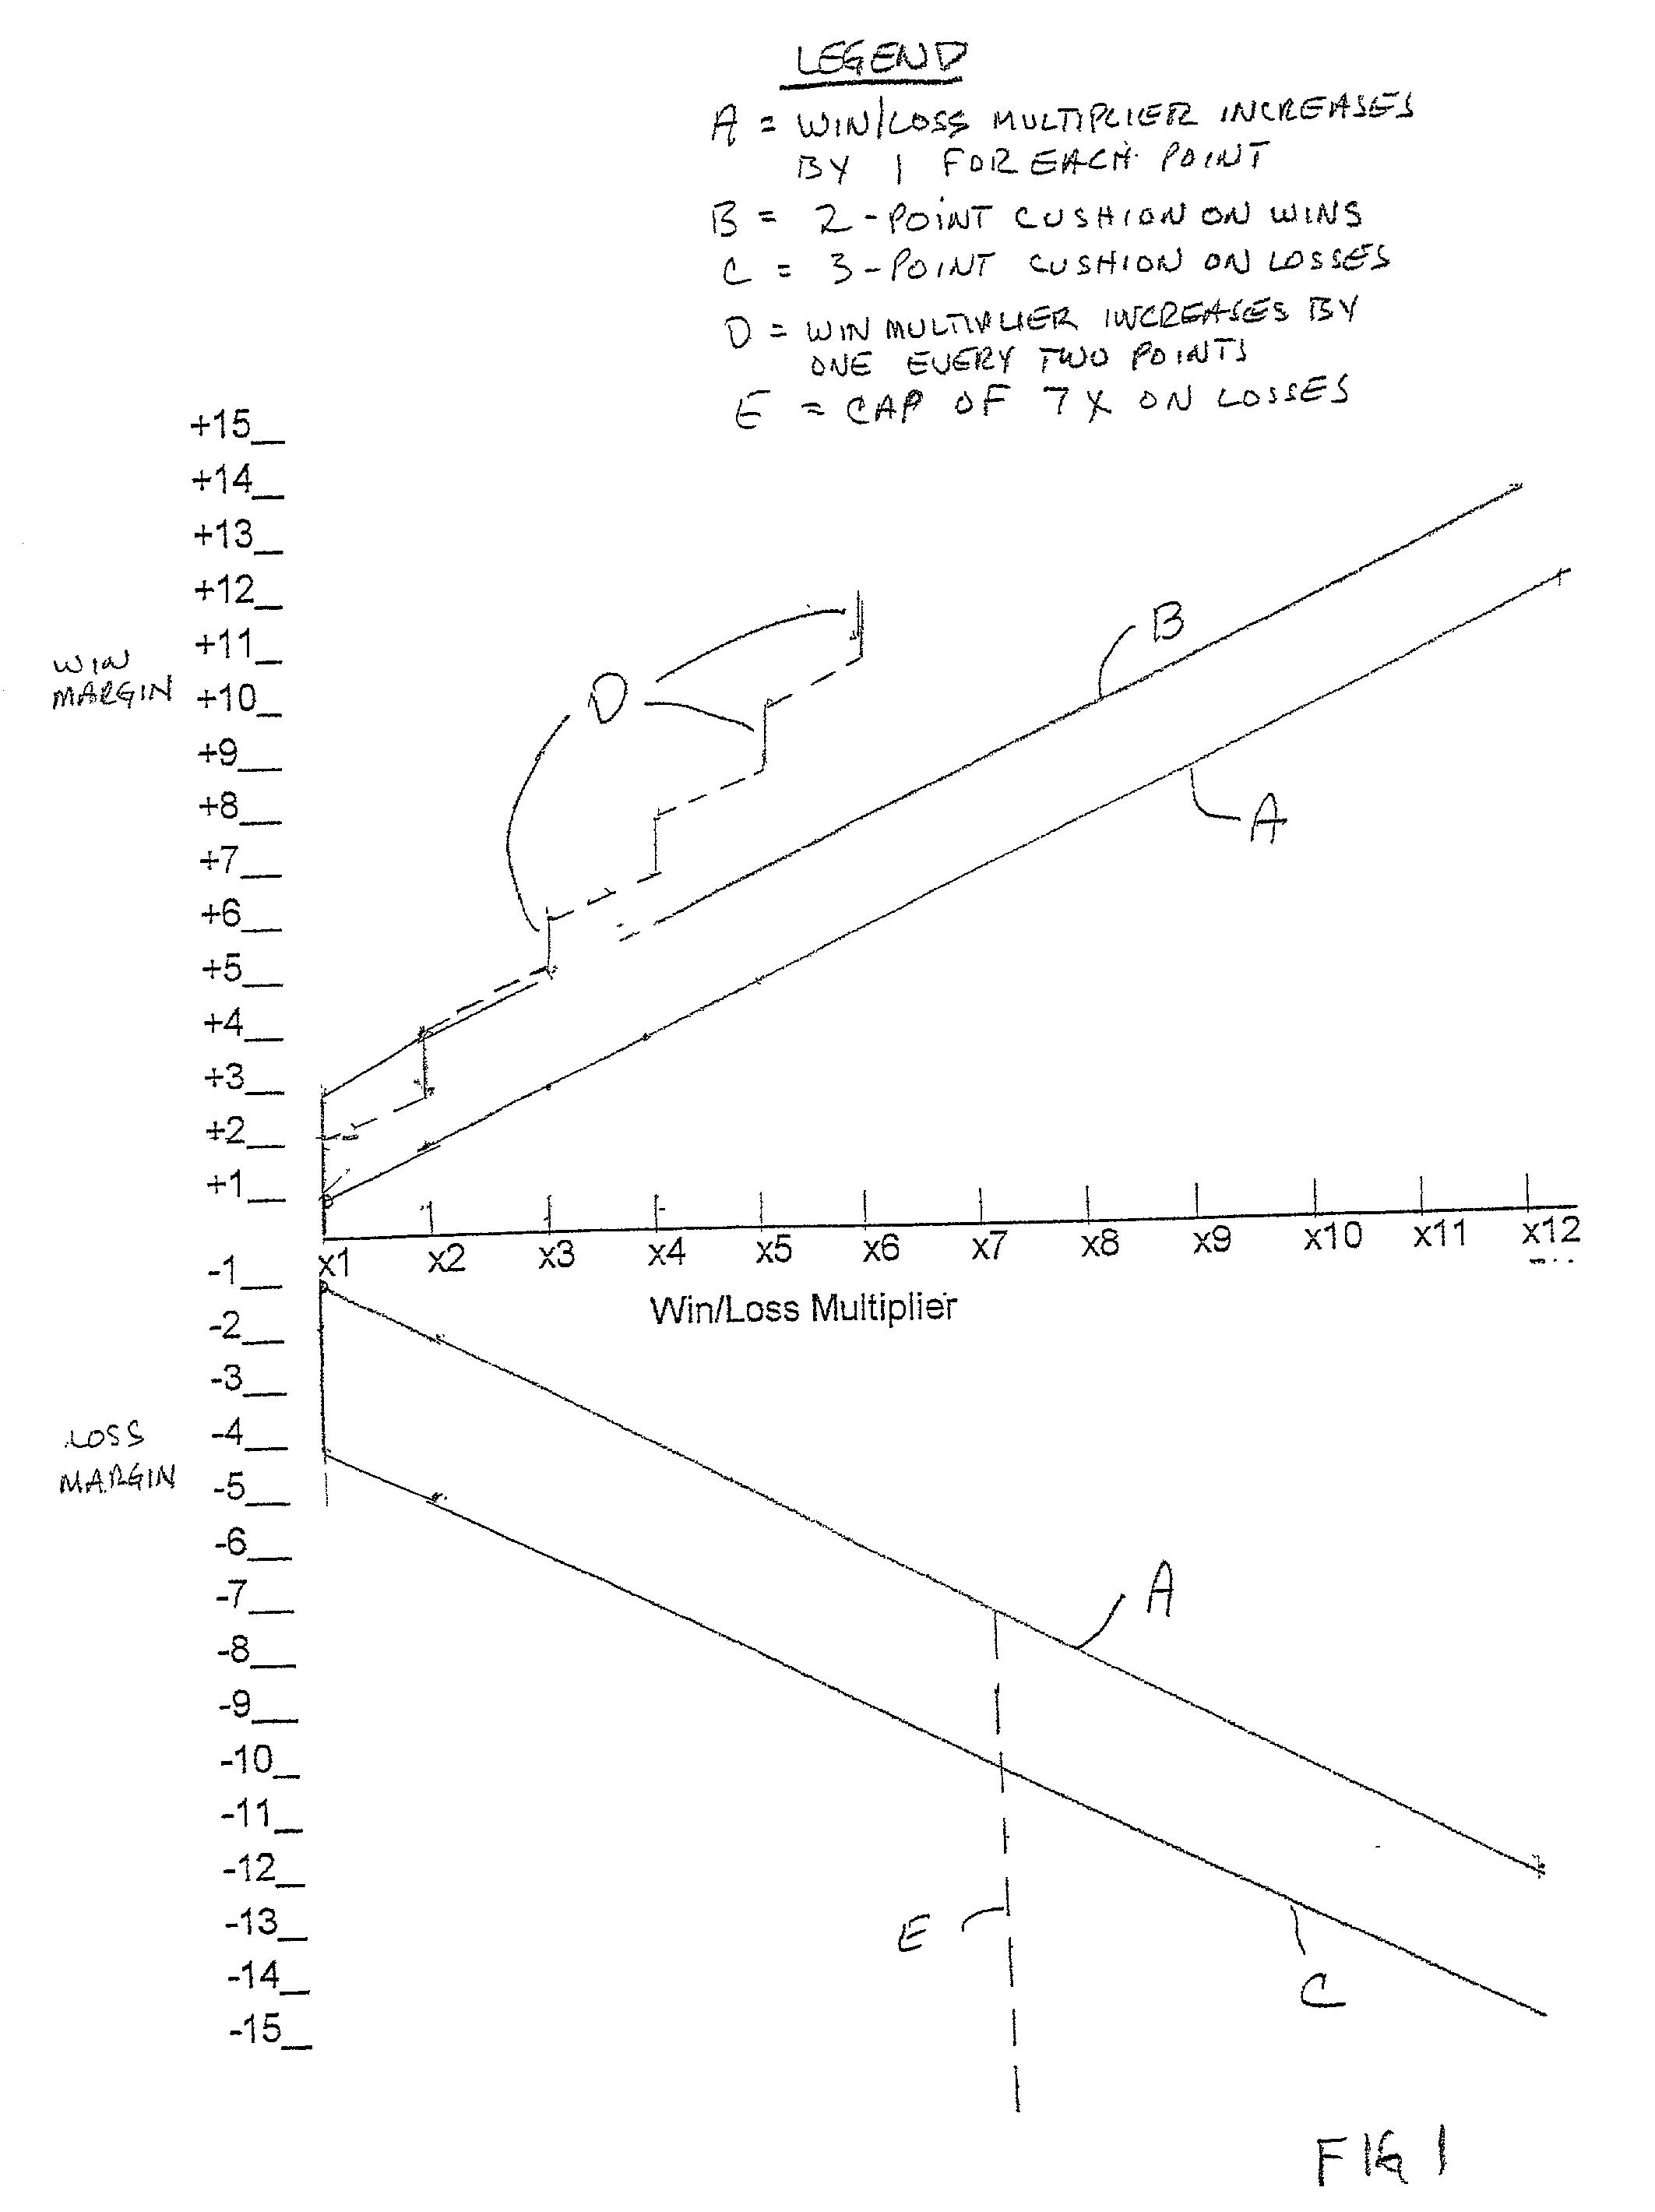 Method of effecting multiple wagers on a sports or other event